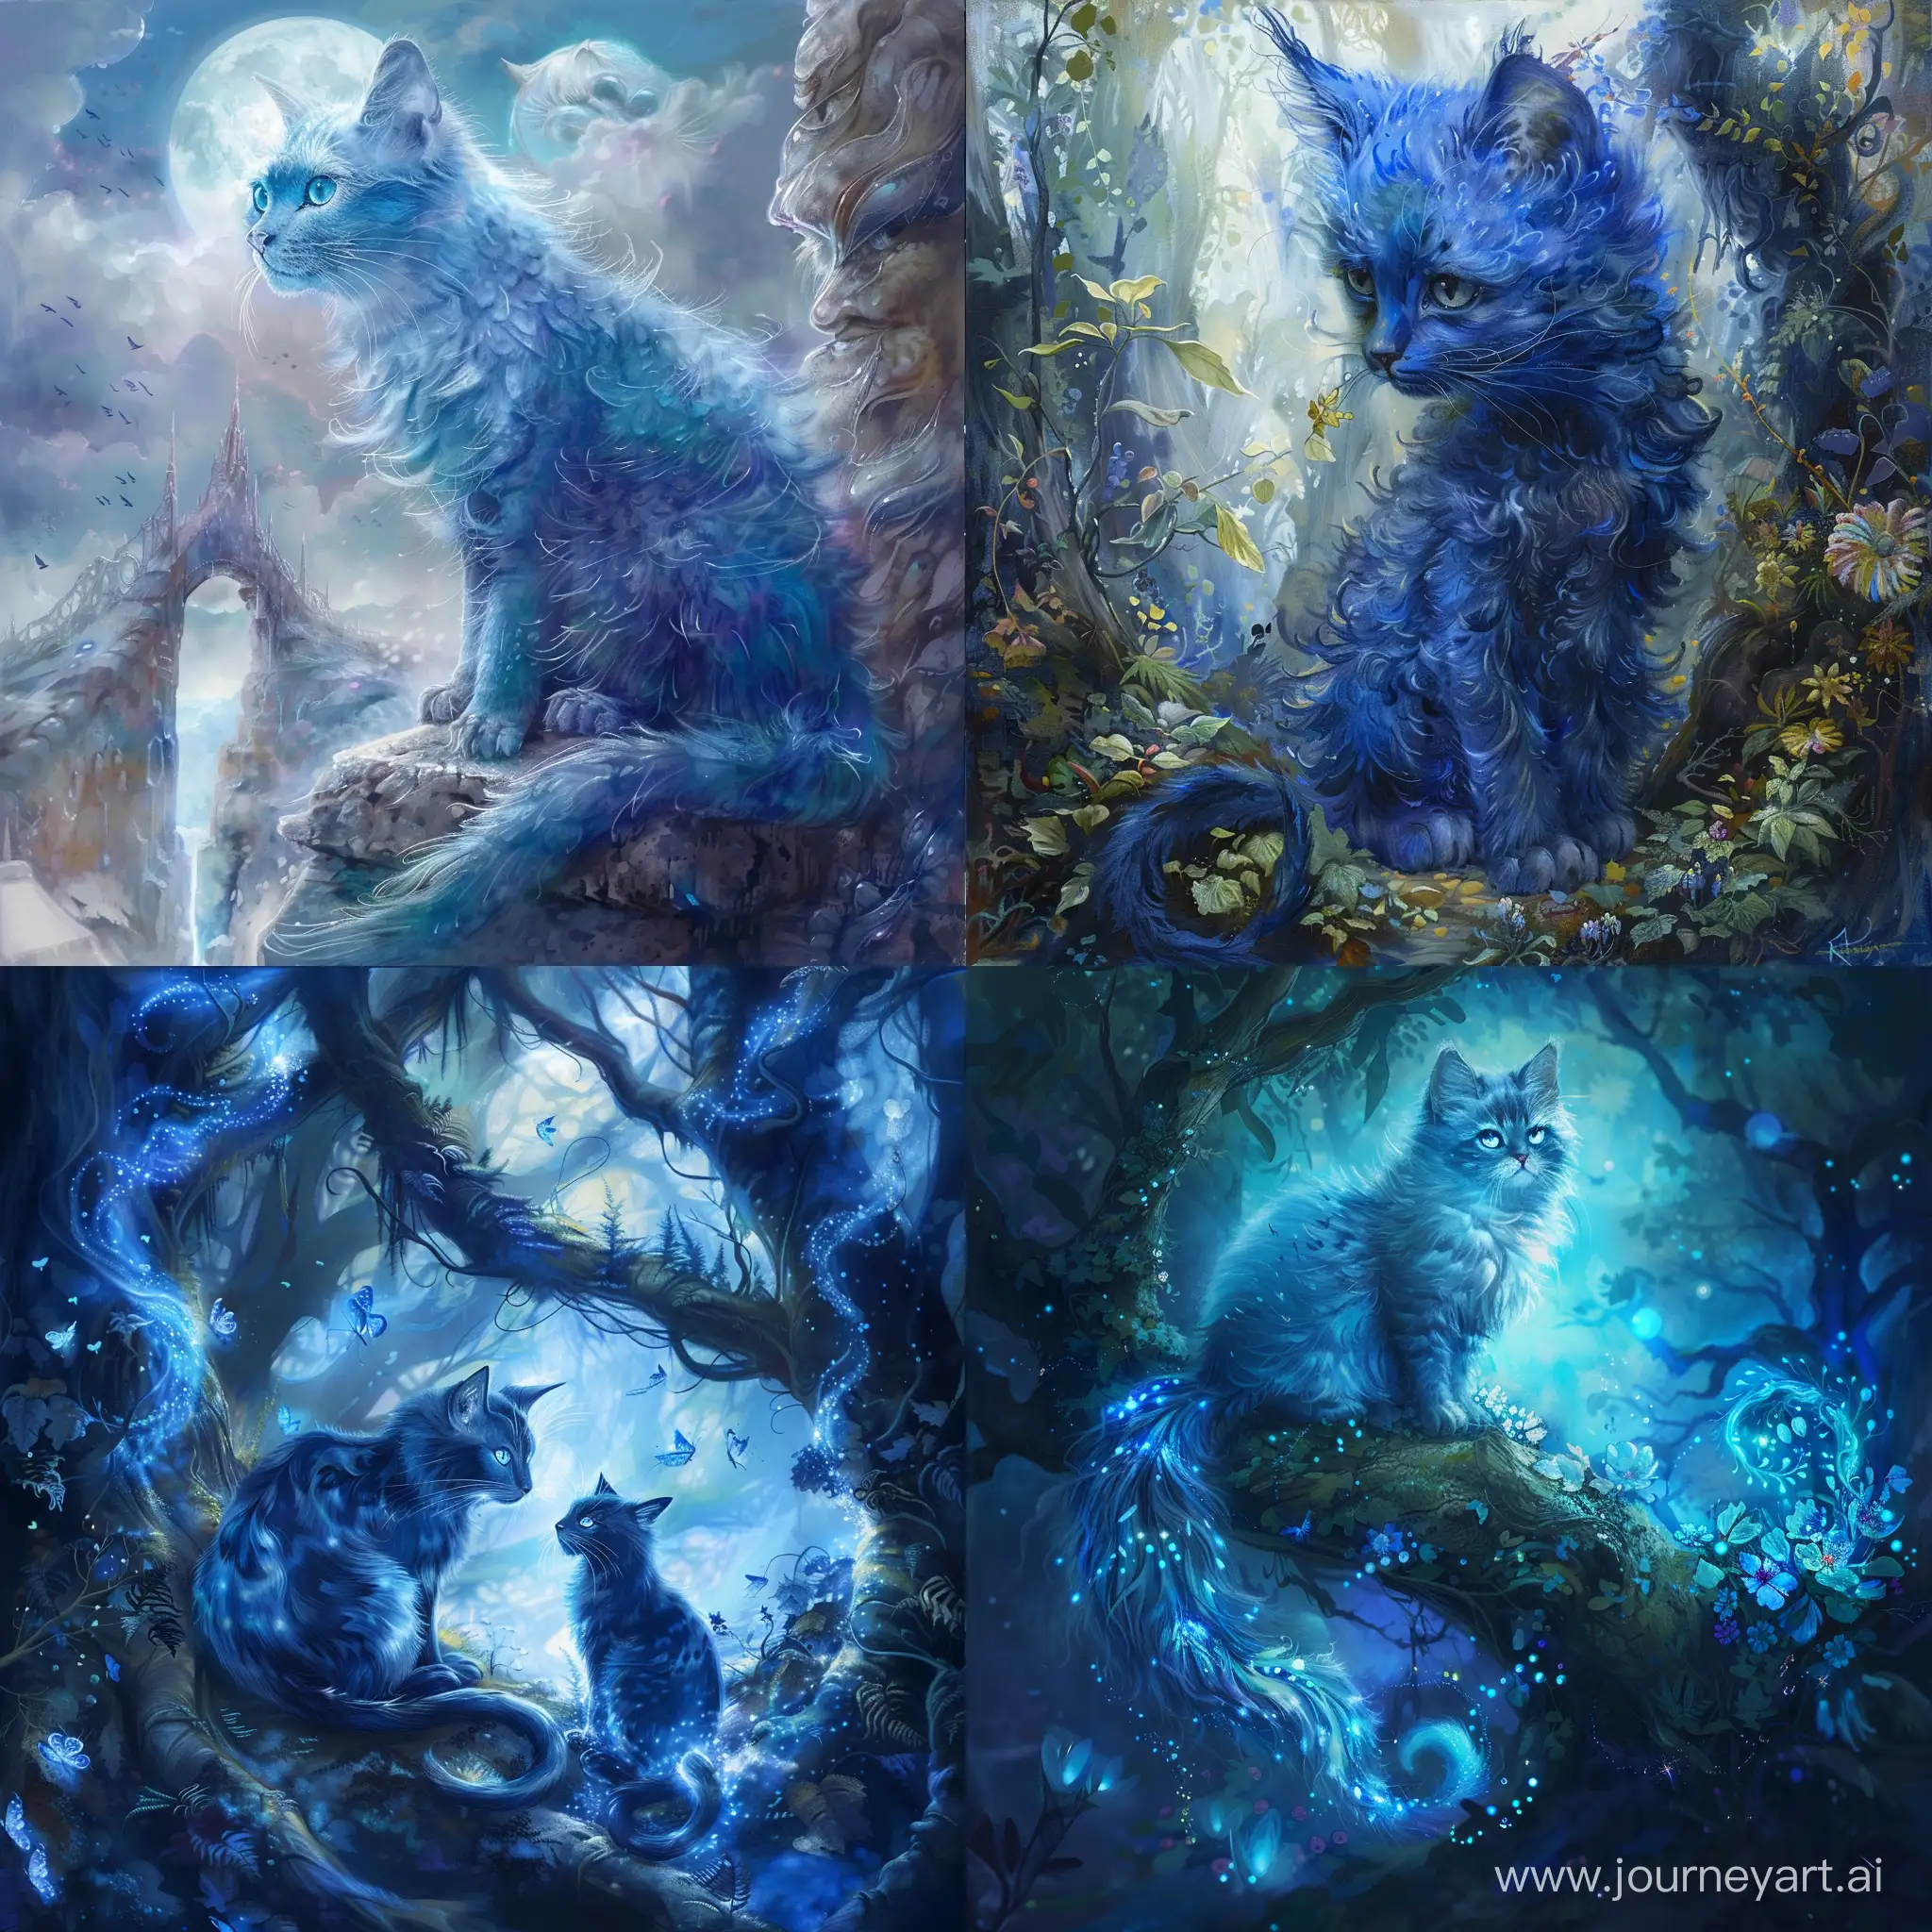 Blue cats in a world of fantasy